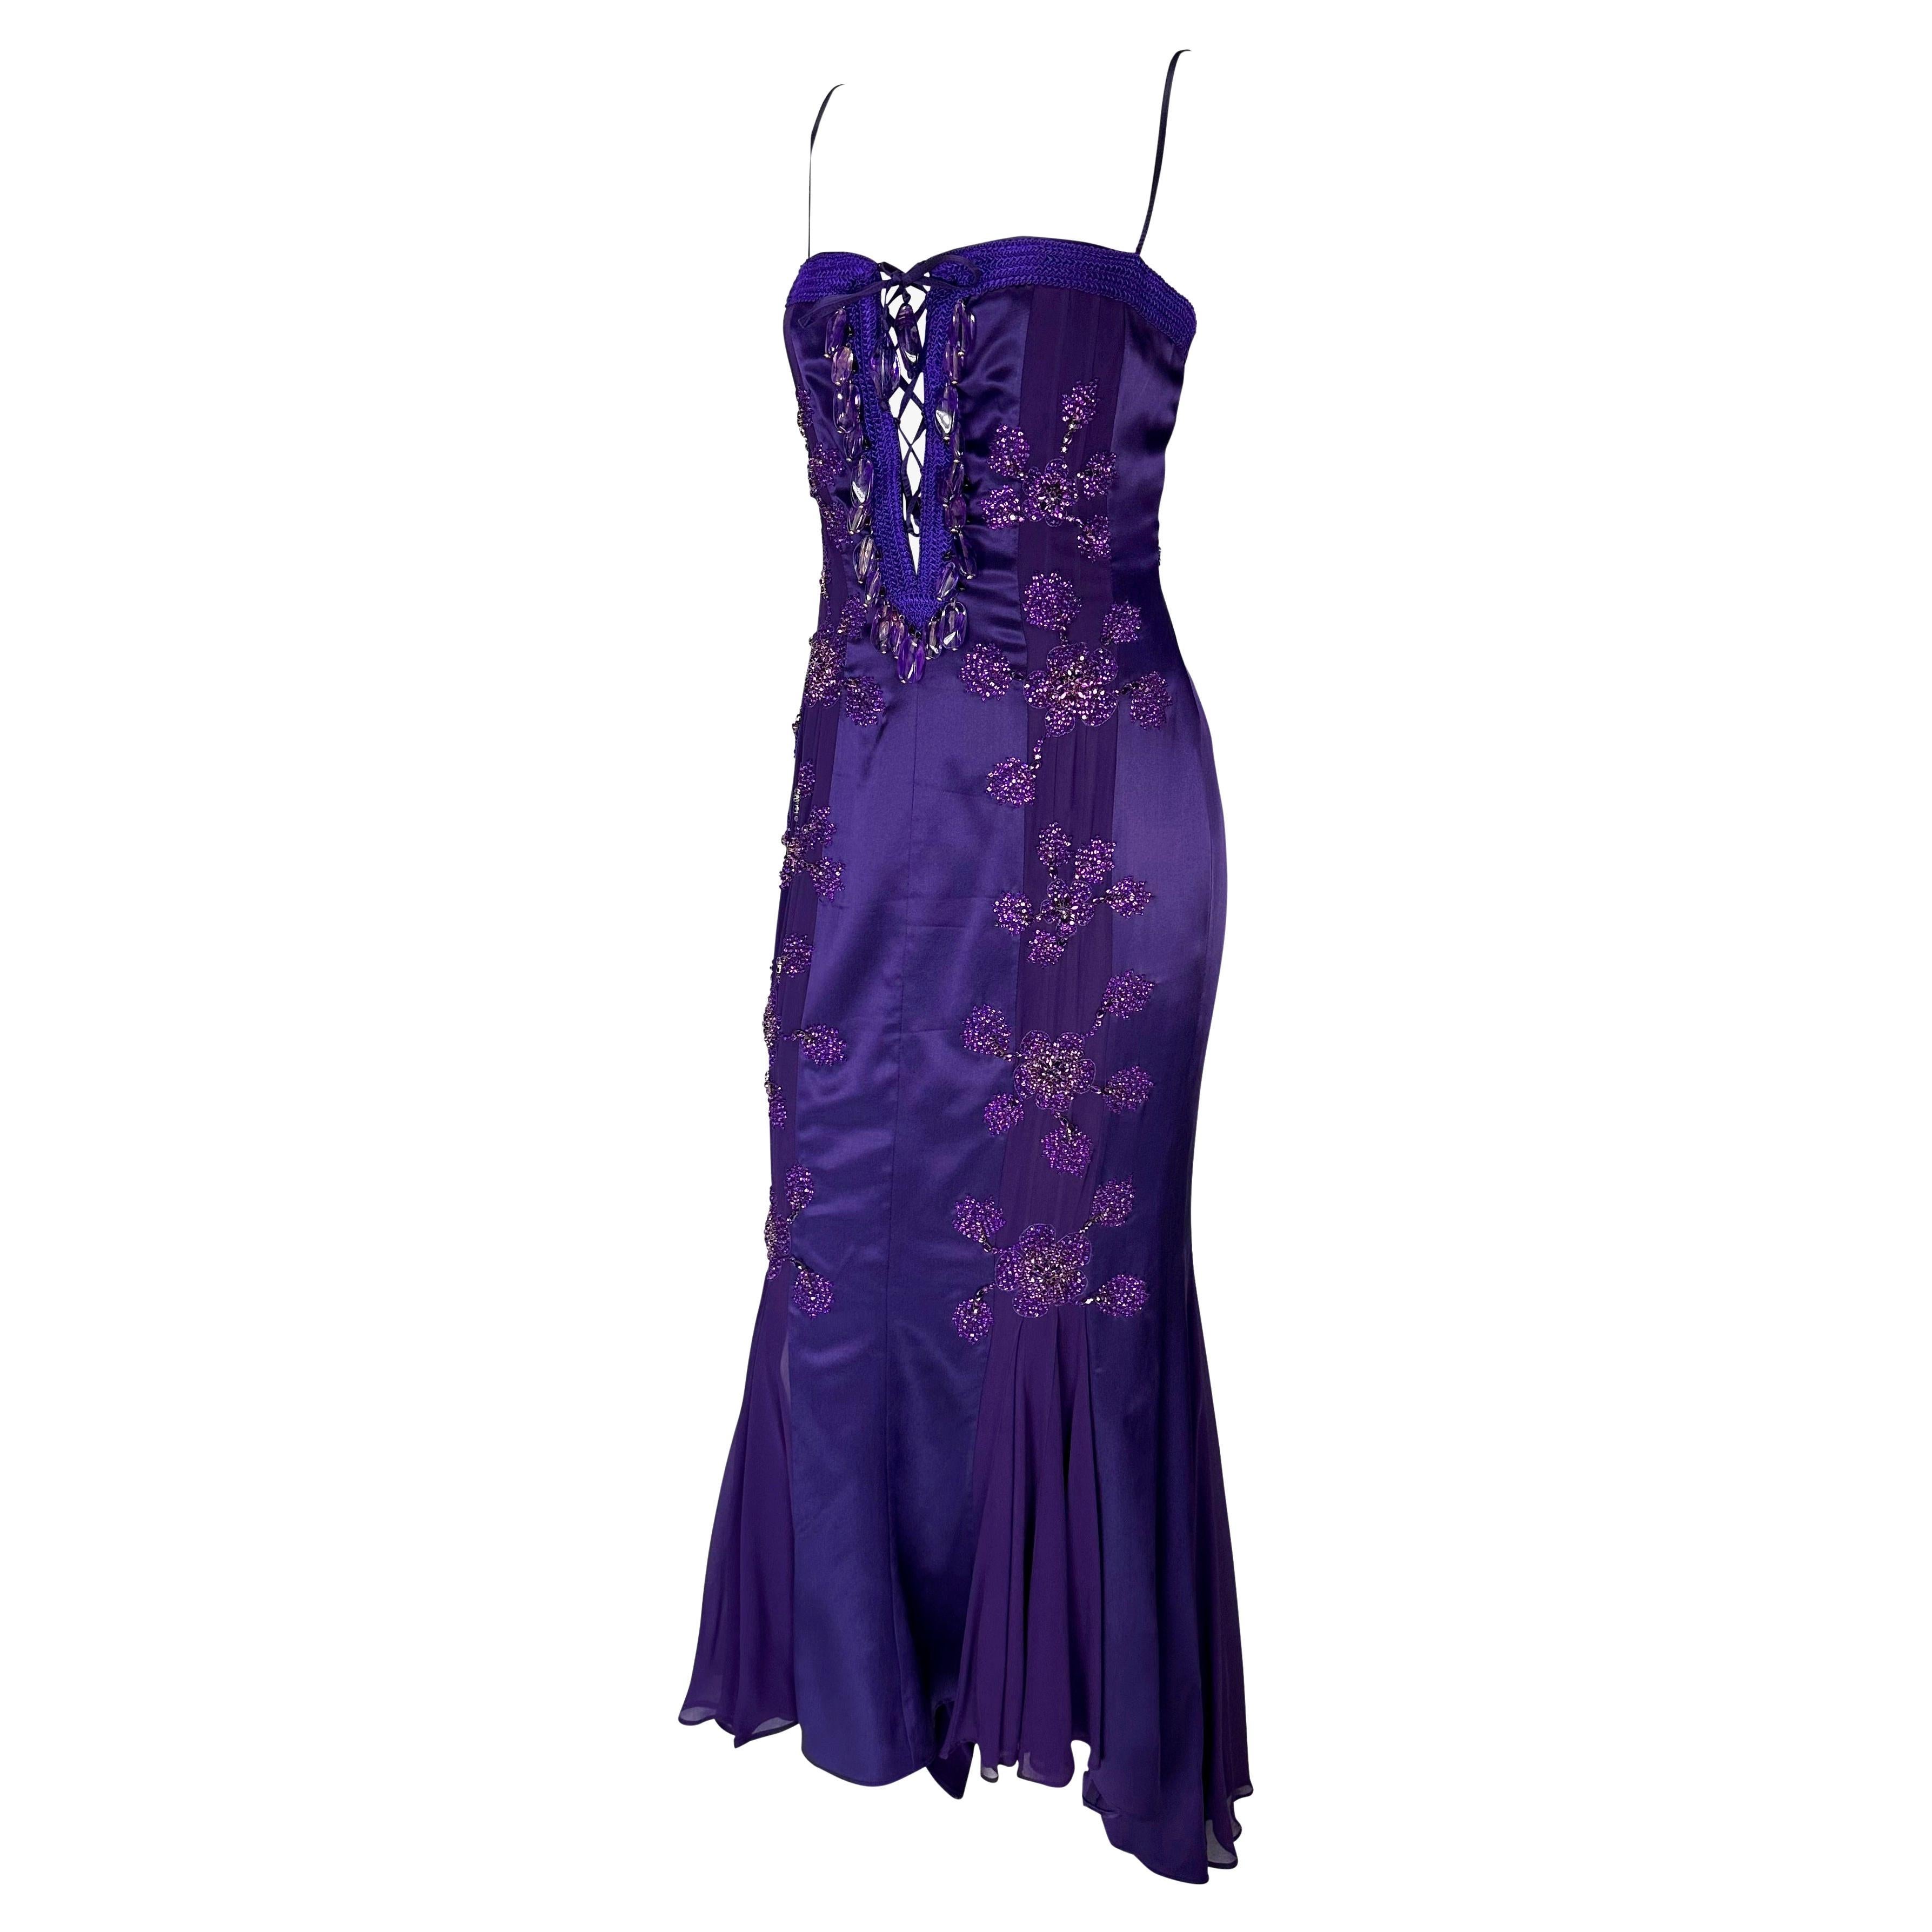 S/S 2005 Emanuel Ungaro by Giambattista Valli Rhinestone Purple Lace-Up Gown In Excellent Condition For Sale In West Hollywood, CA